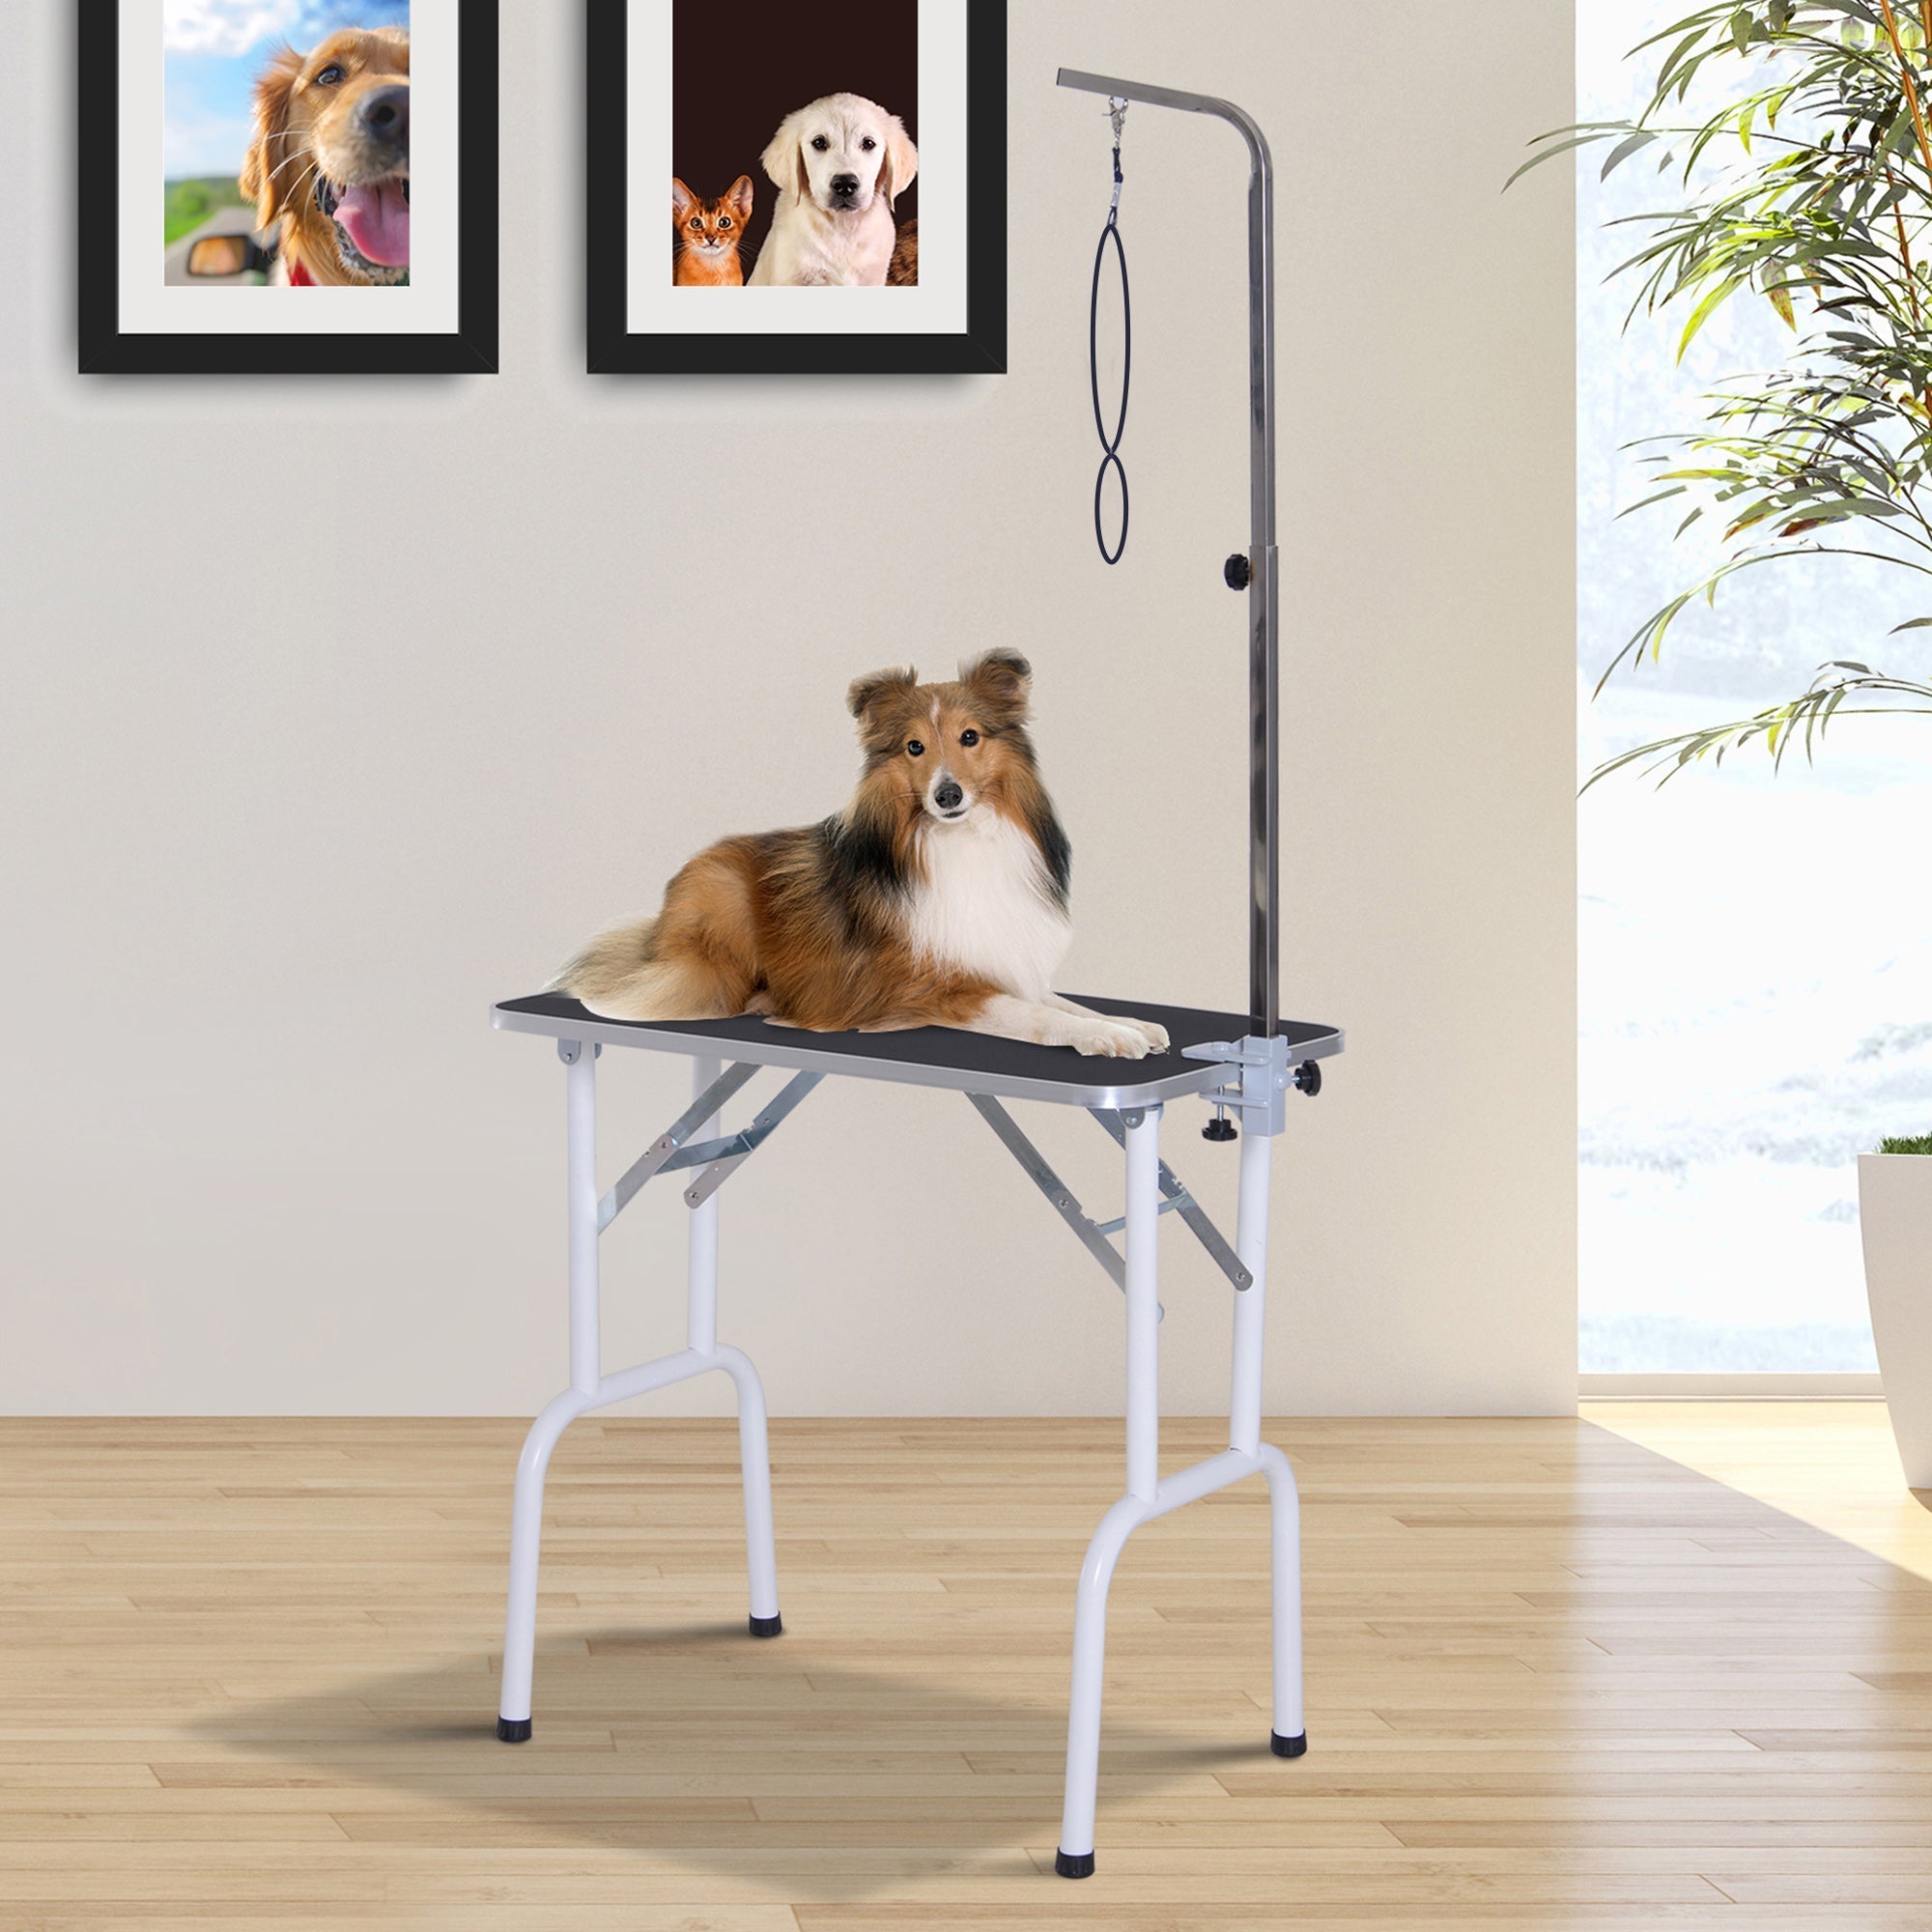 Folding Pet Grooming Table for Small Dogs with Adjustable Grooming Arm Max Load 30 KG, 81x48.5x80 cm, PawHut,